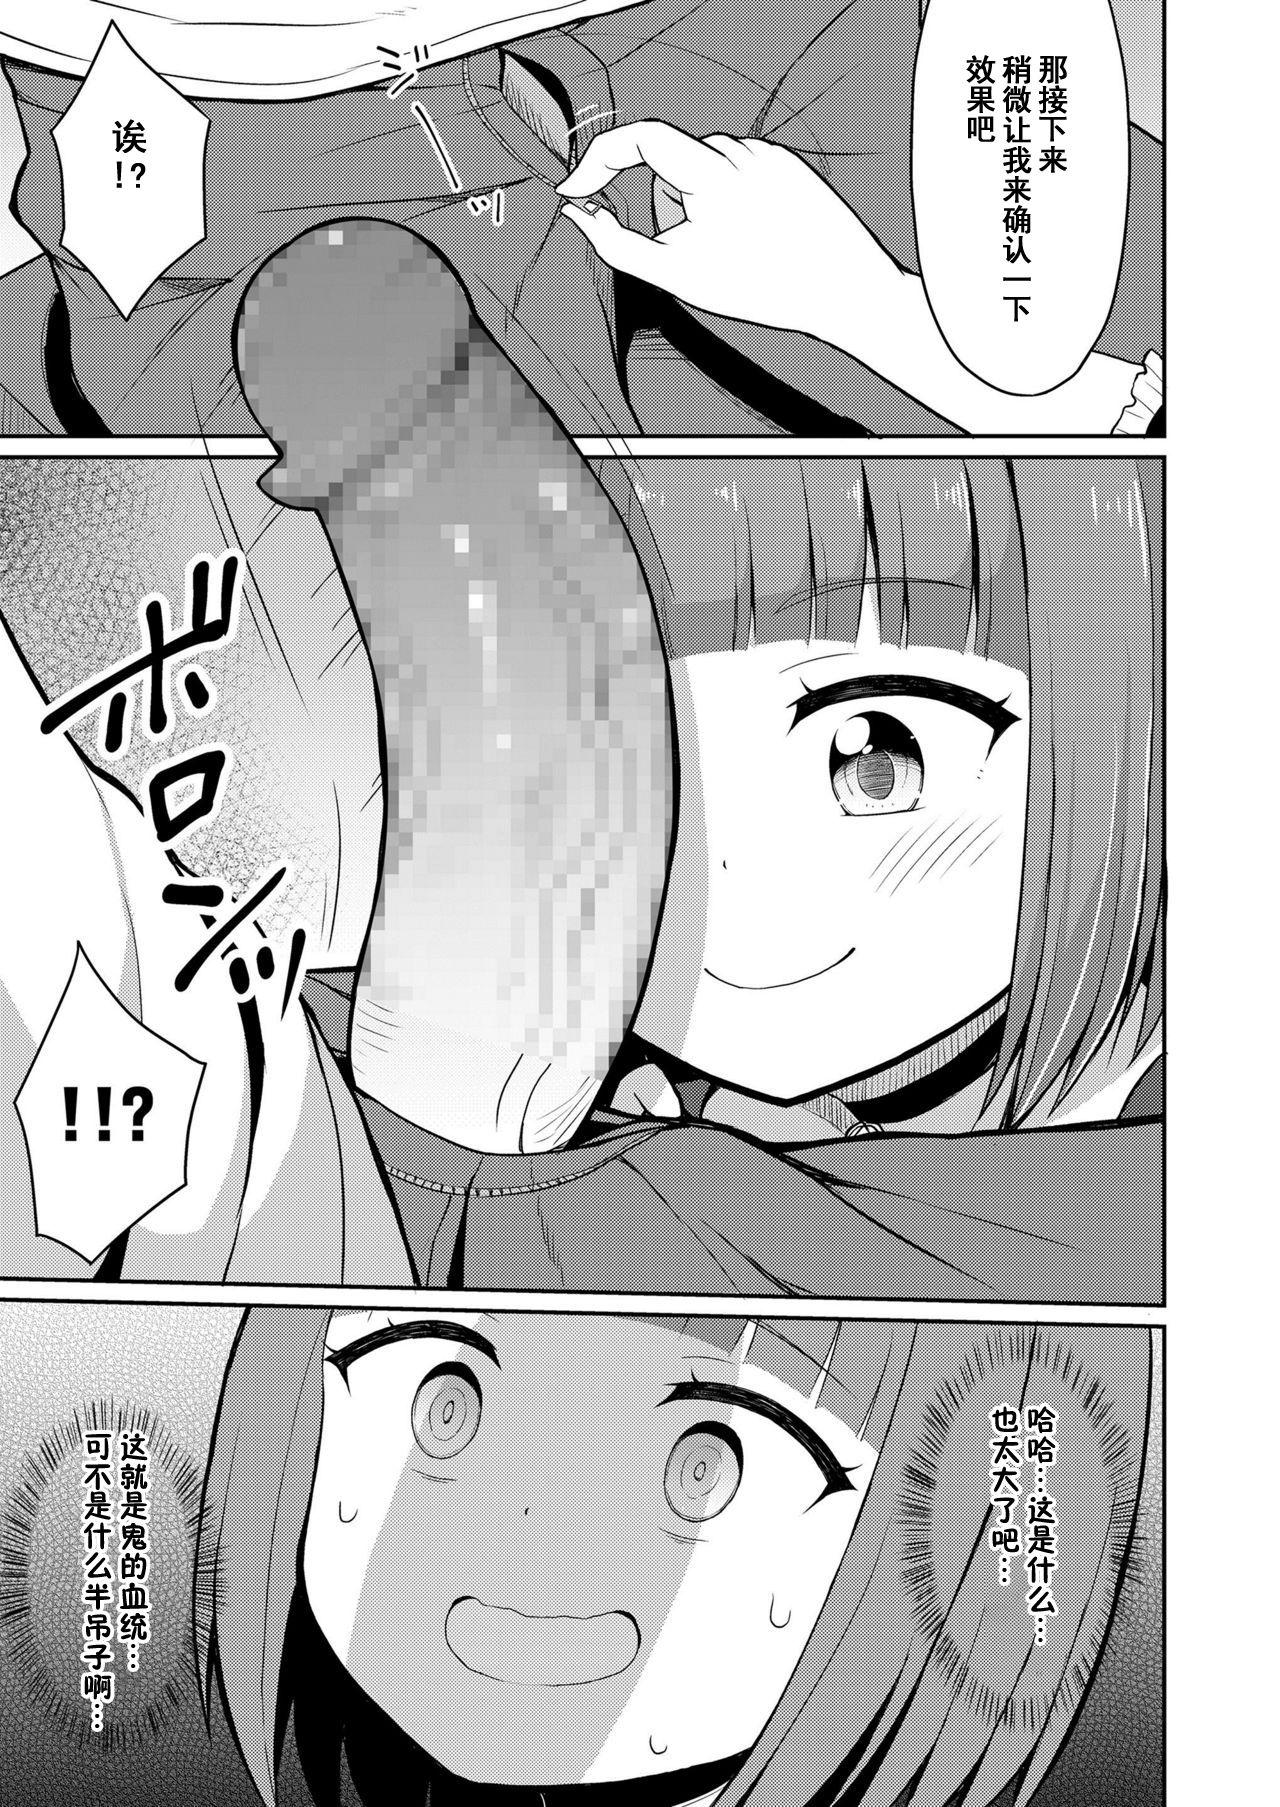 Breast Cafe Eternal e Youkoso! Ch. 5 | 欢迎来到永远咖啡厅！第五话 Panty - Page 5